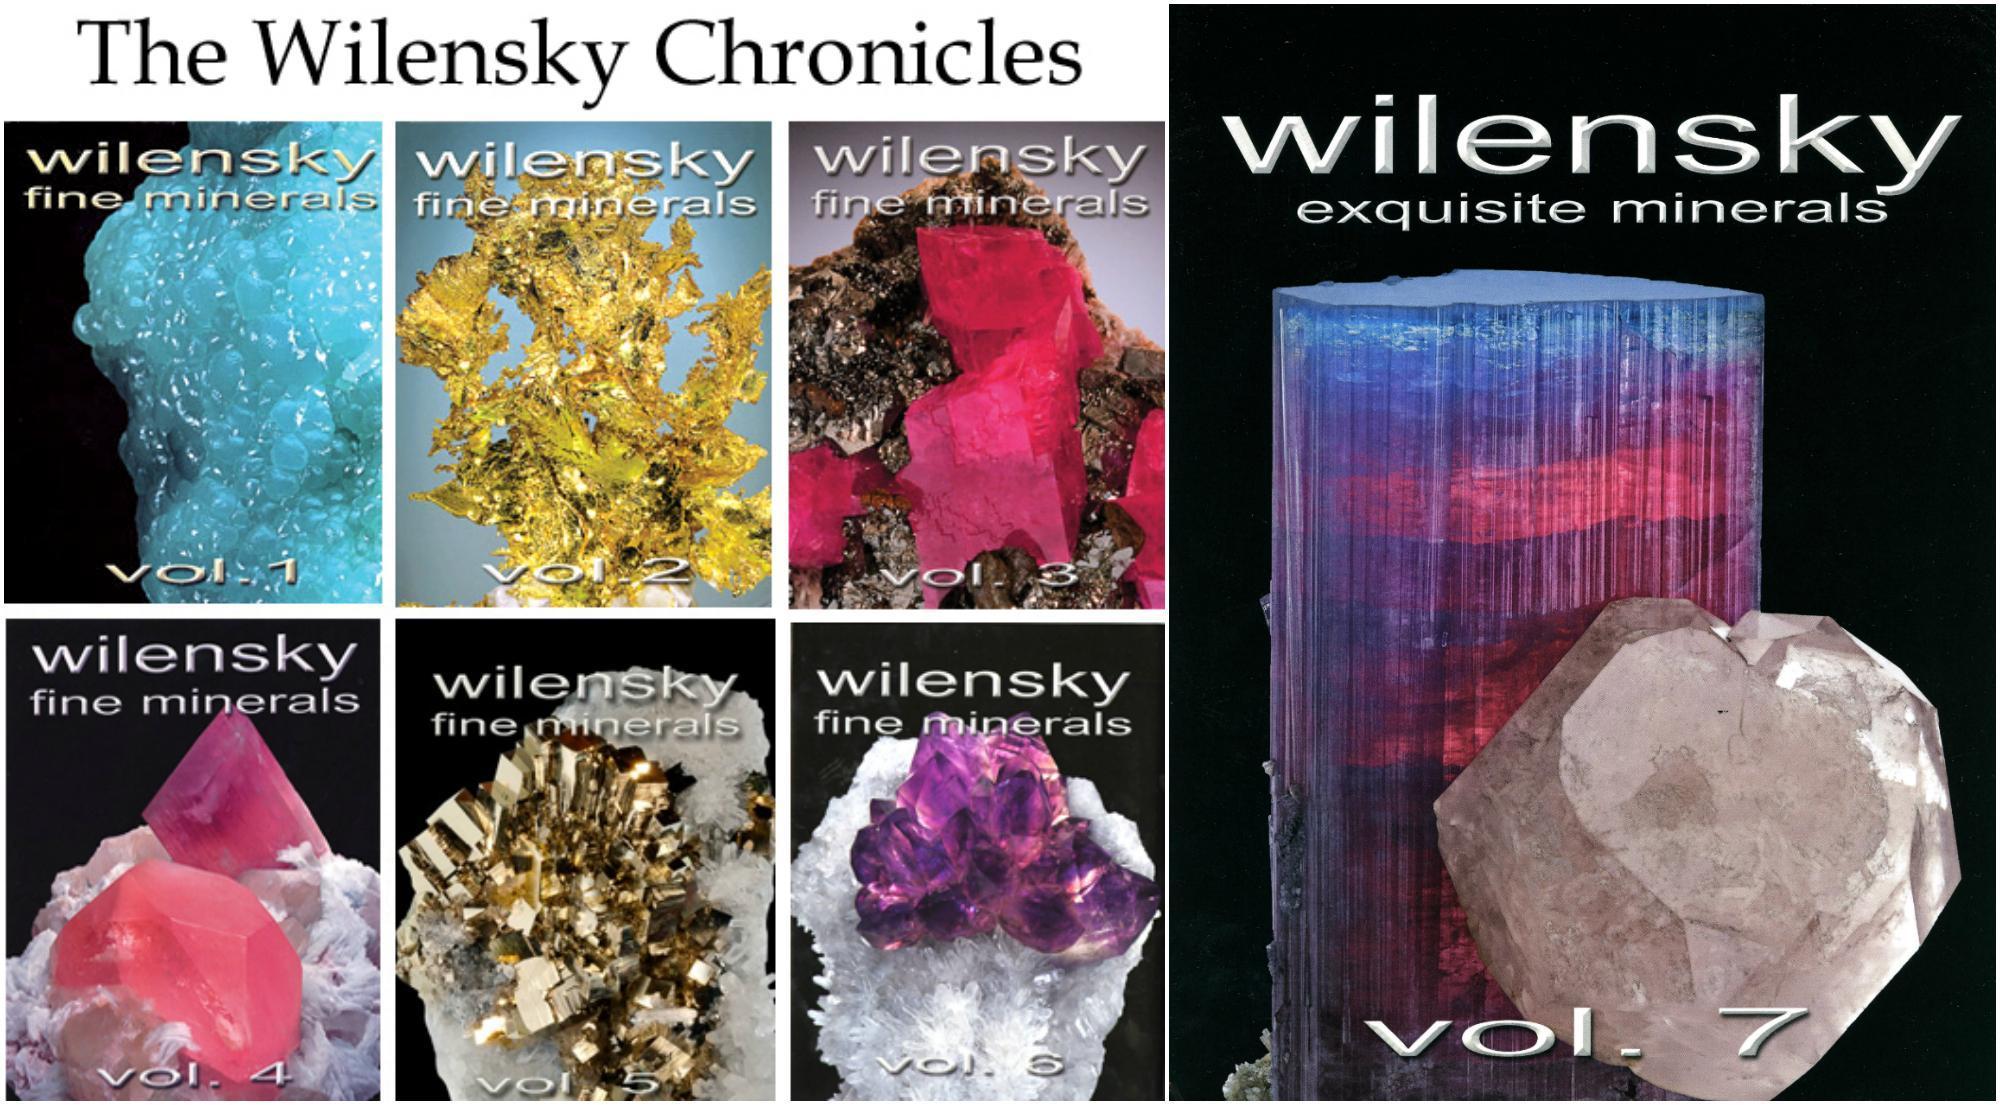 THE WILENSKY CHRONICLES Complete set of 7 volumes